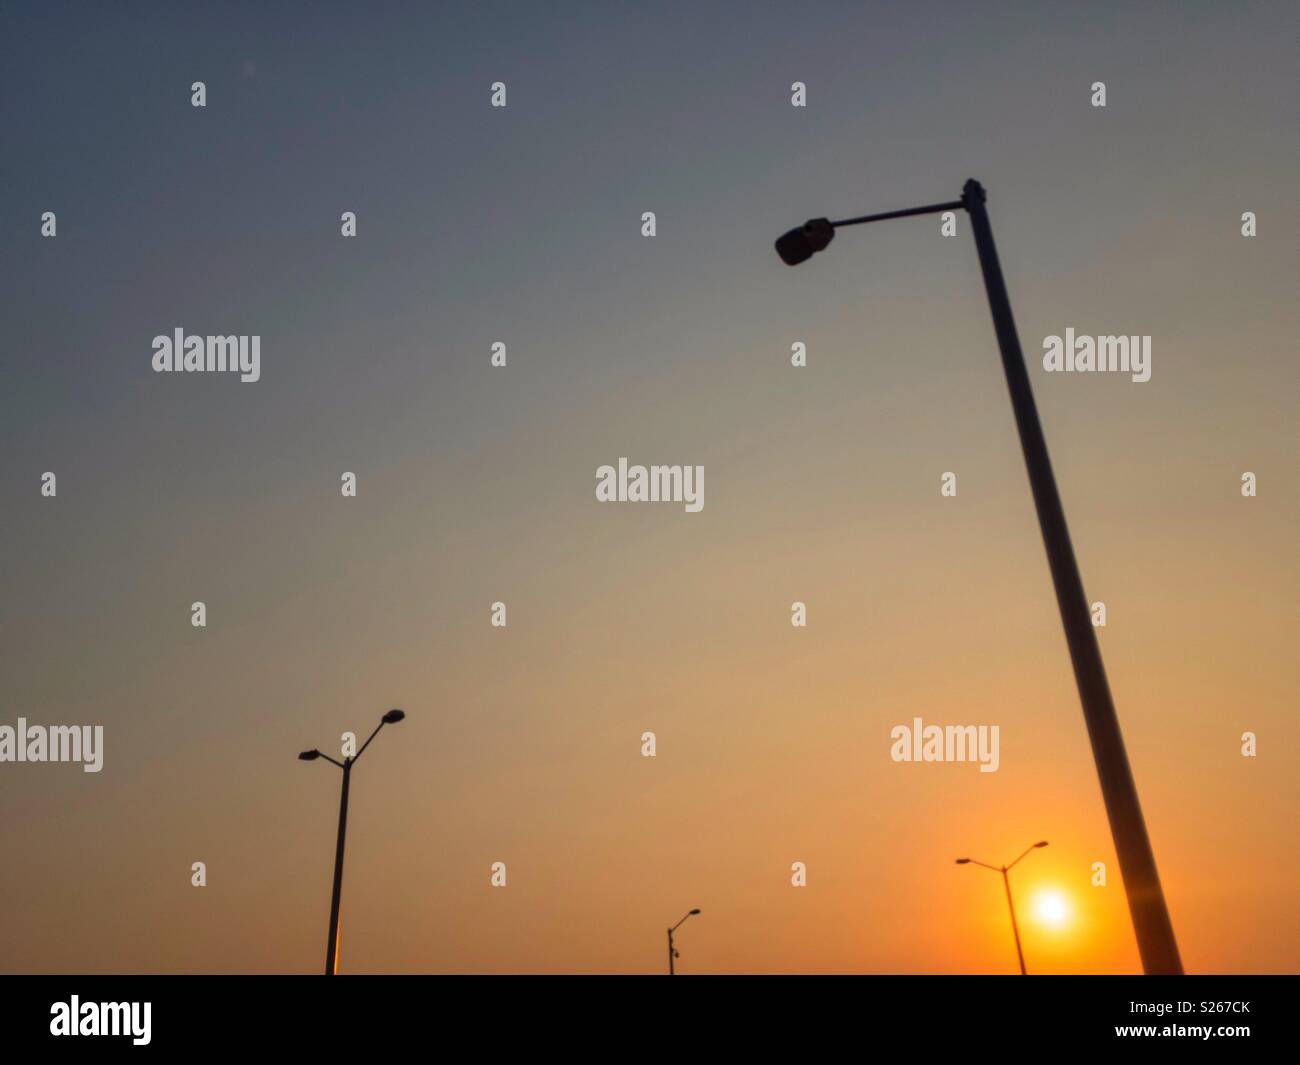 Sunrise and lampposts silhouettes. Stock Photo